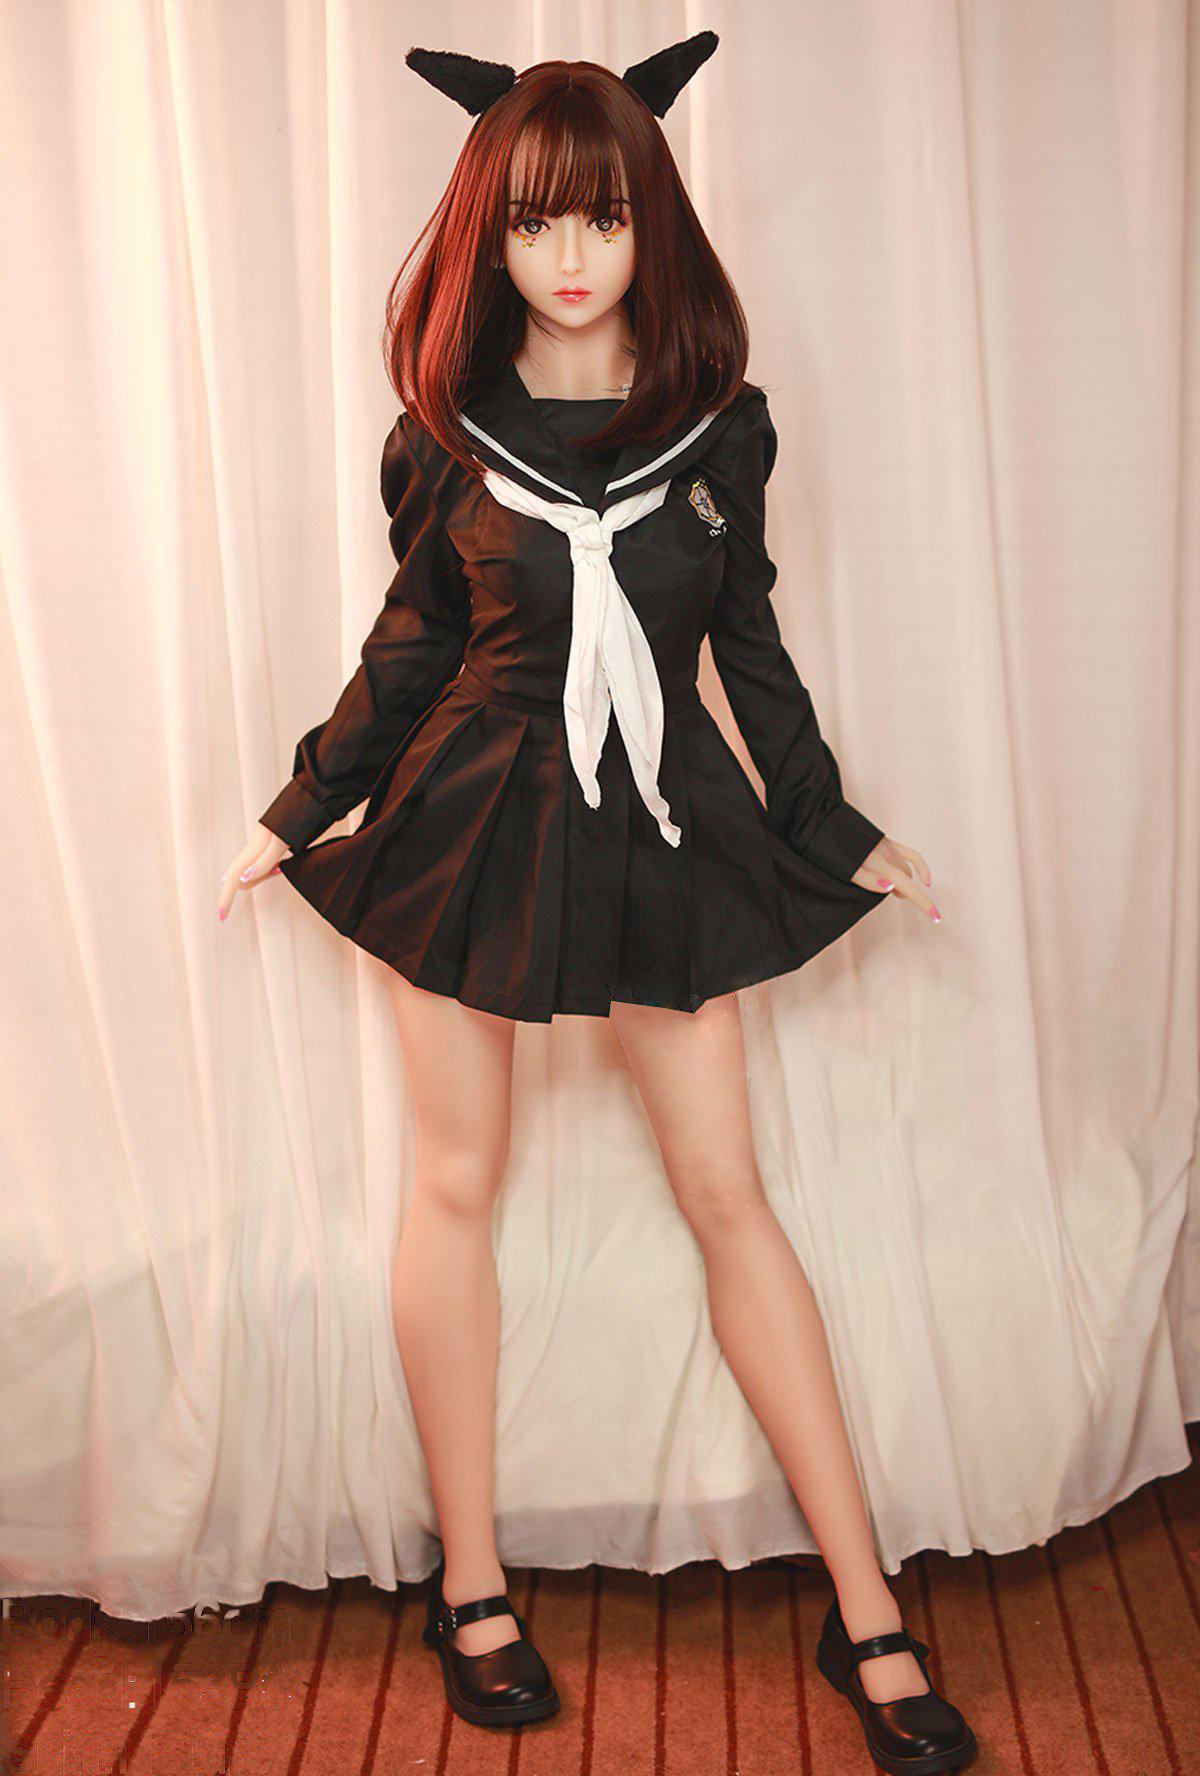 Lilly-Cute-Asian-Sex-Doll-9